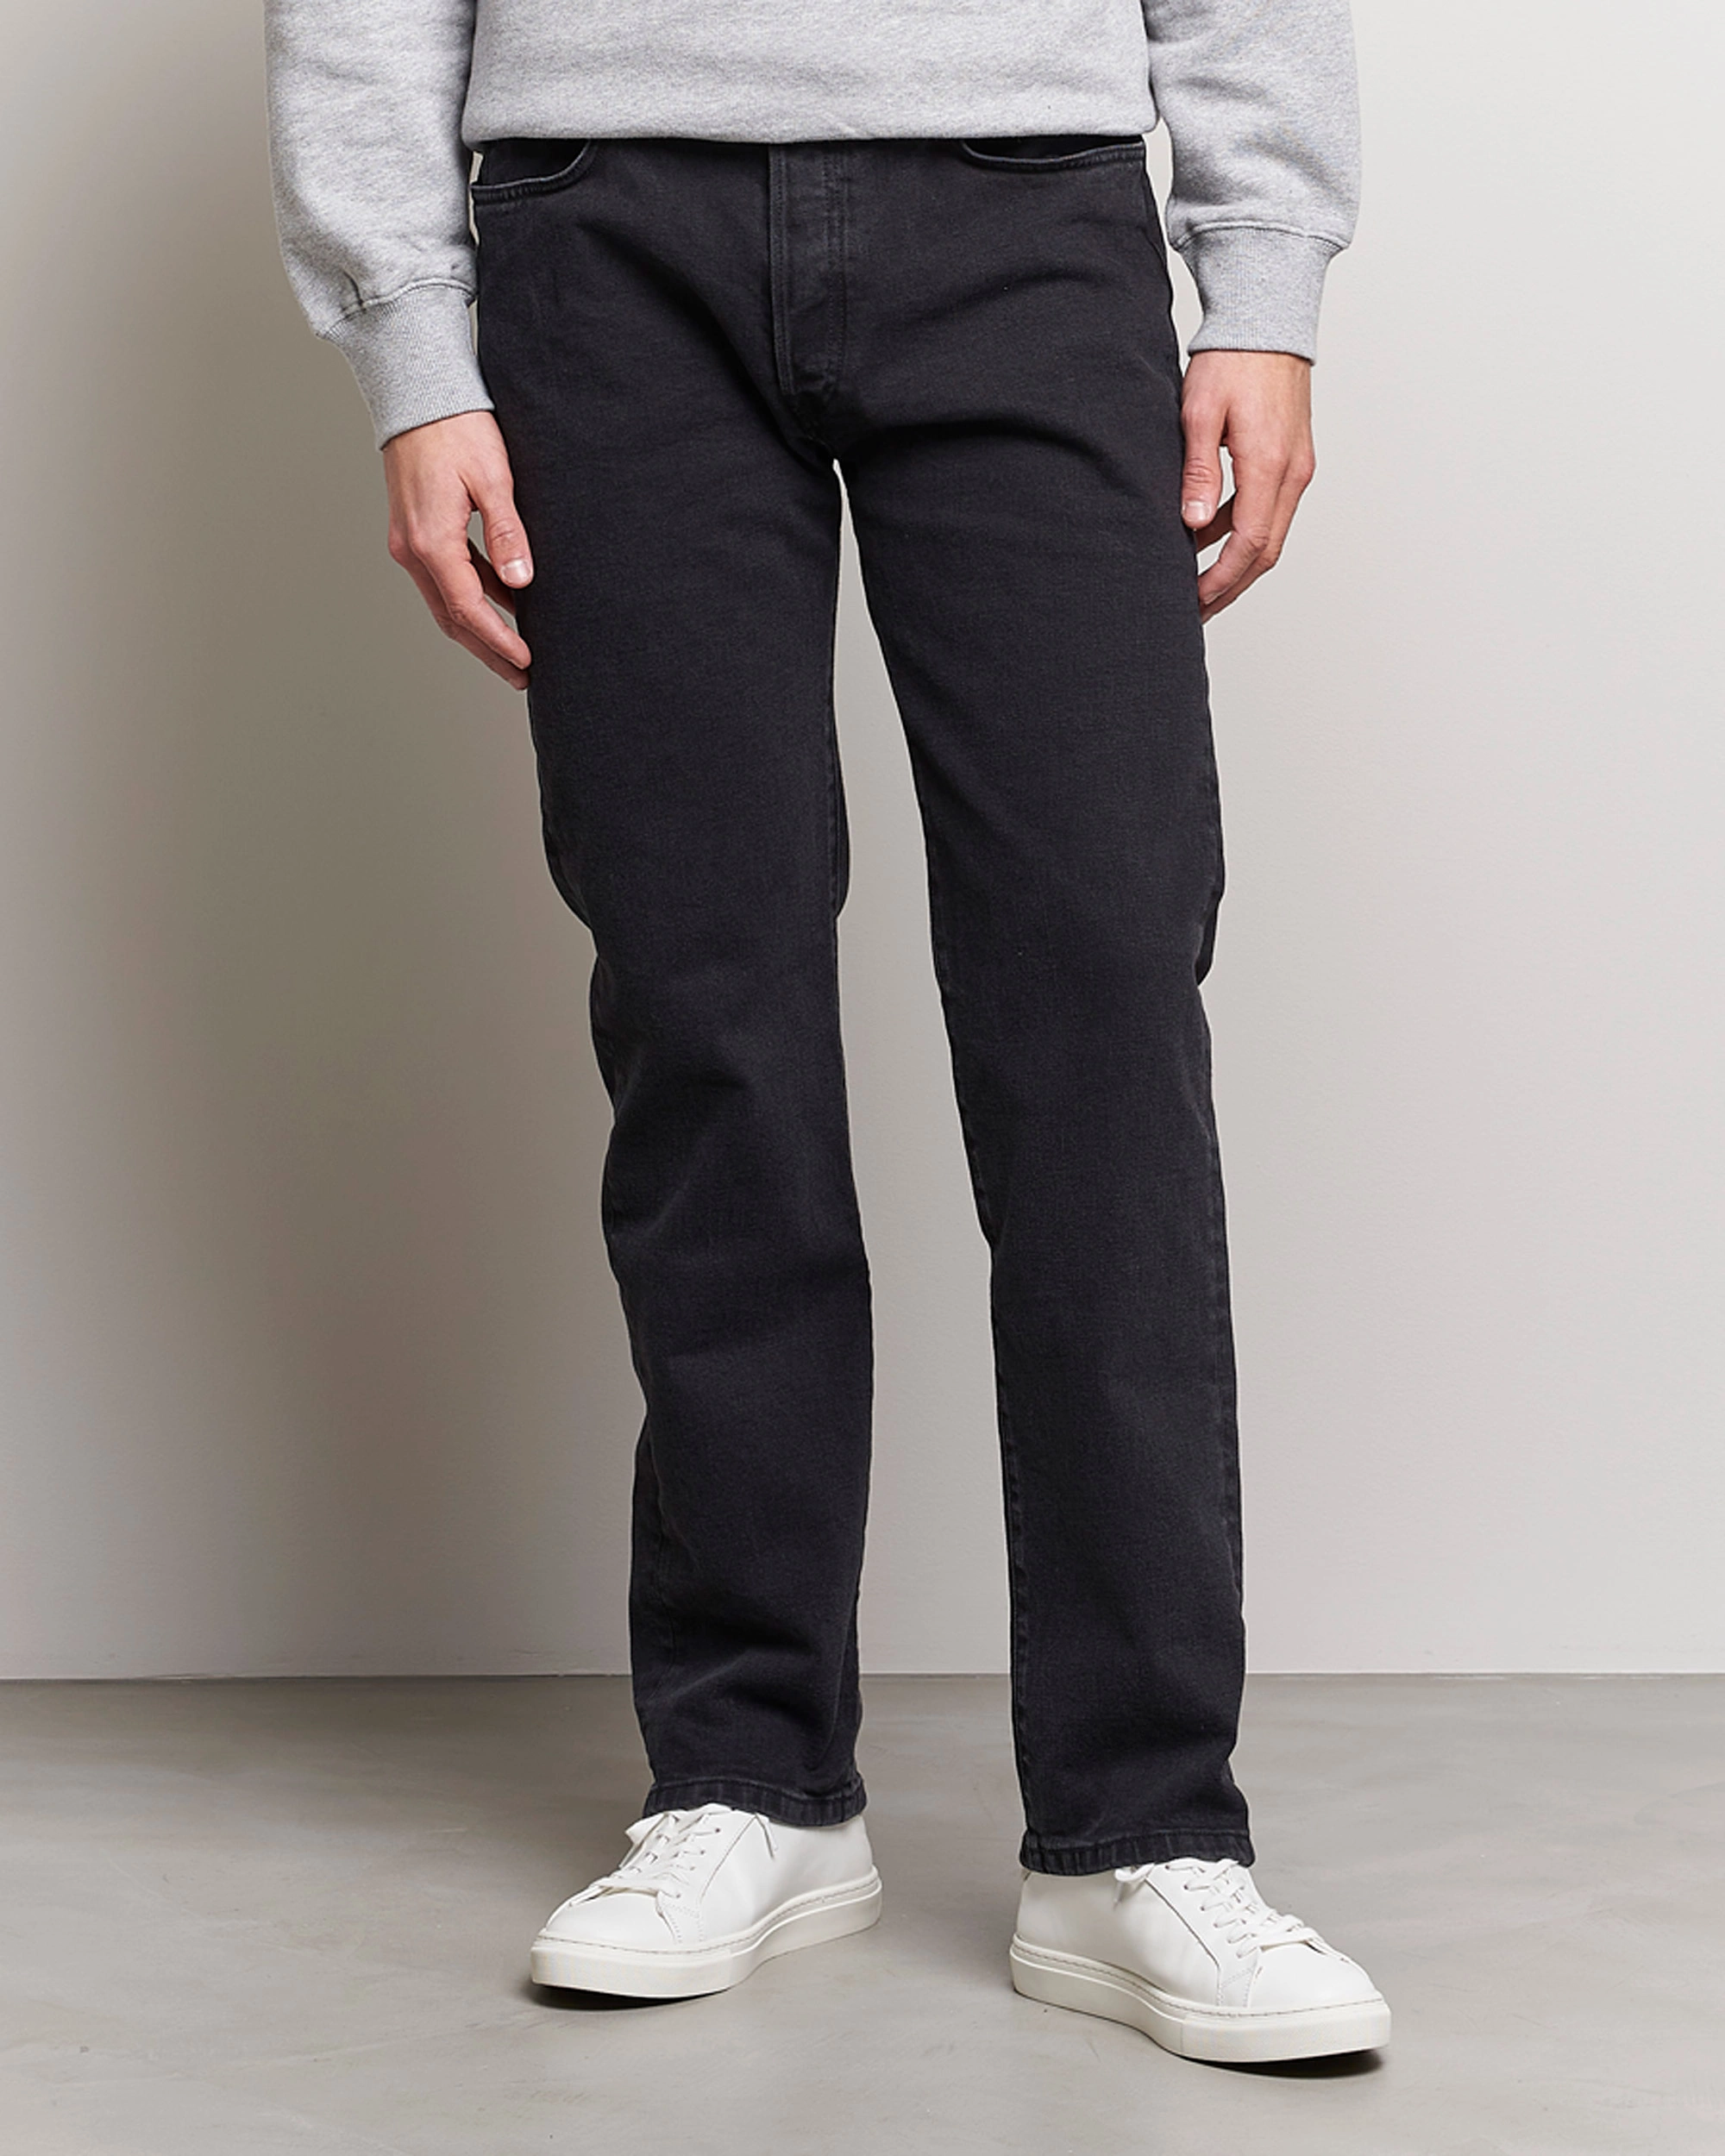 Homme | Jeans | Jeanerica | CM002 Classic Jeans Black 2 Weeks